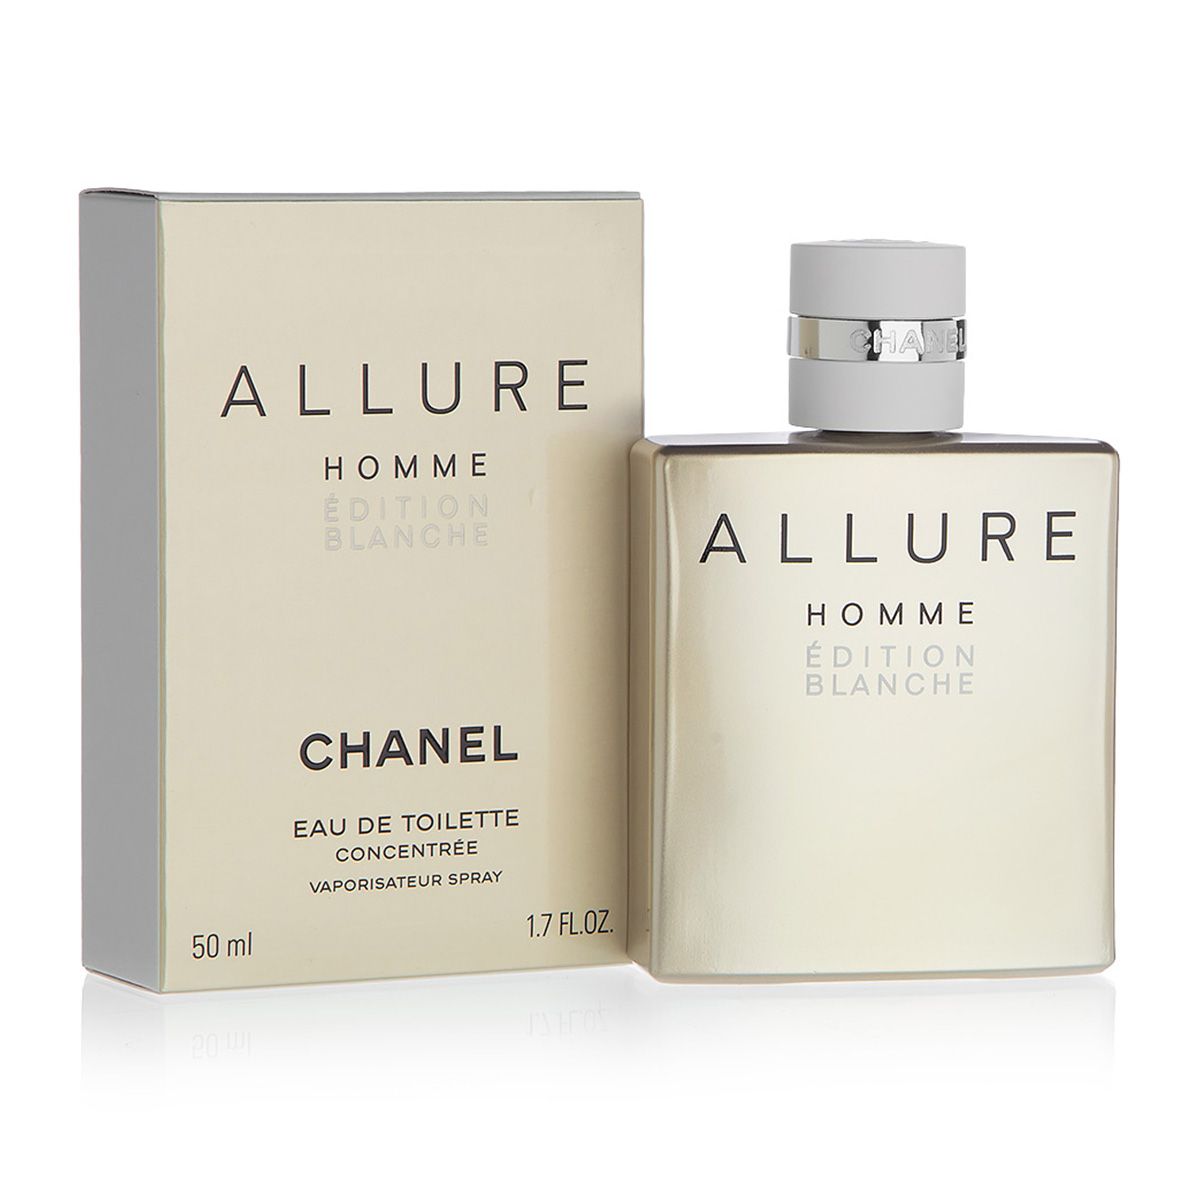 Allure Homme Edition Blanche Chanel cologne  a fragrance for men 2008